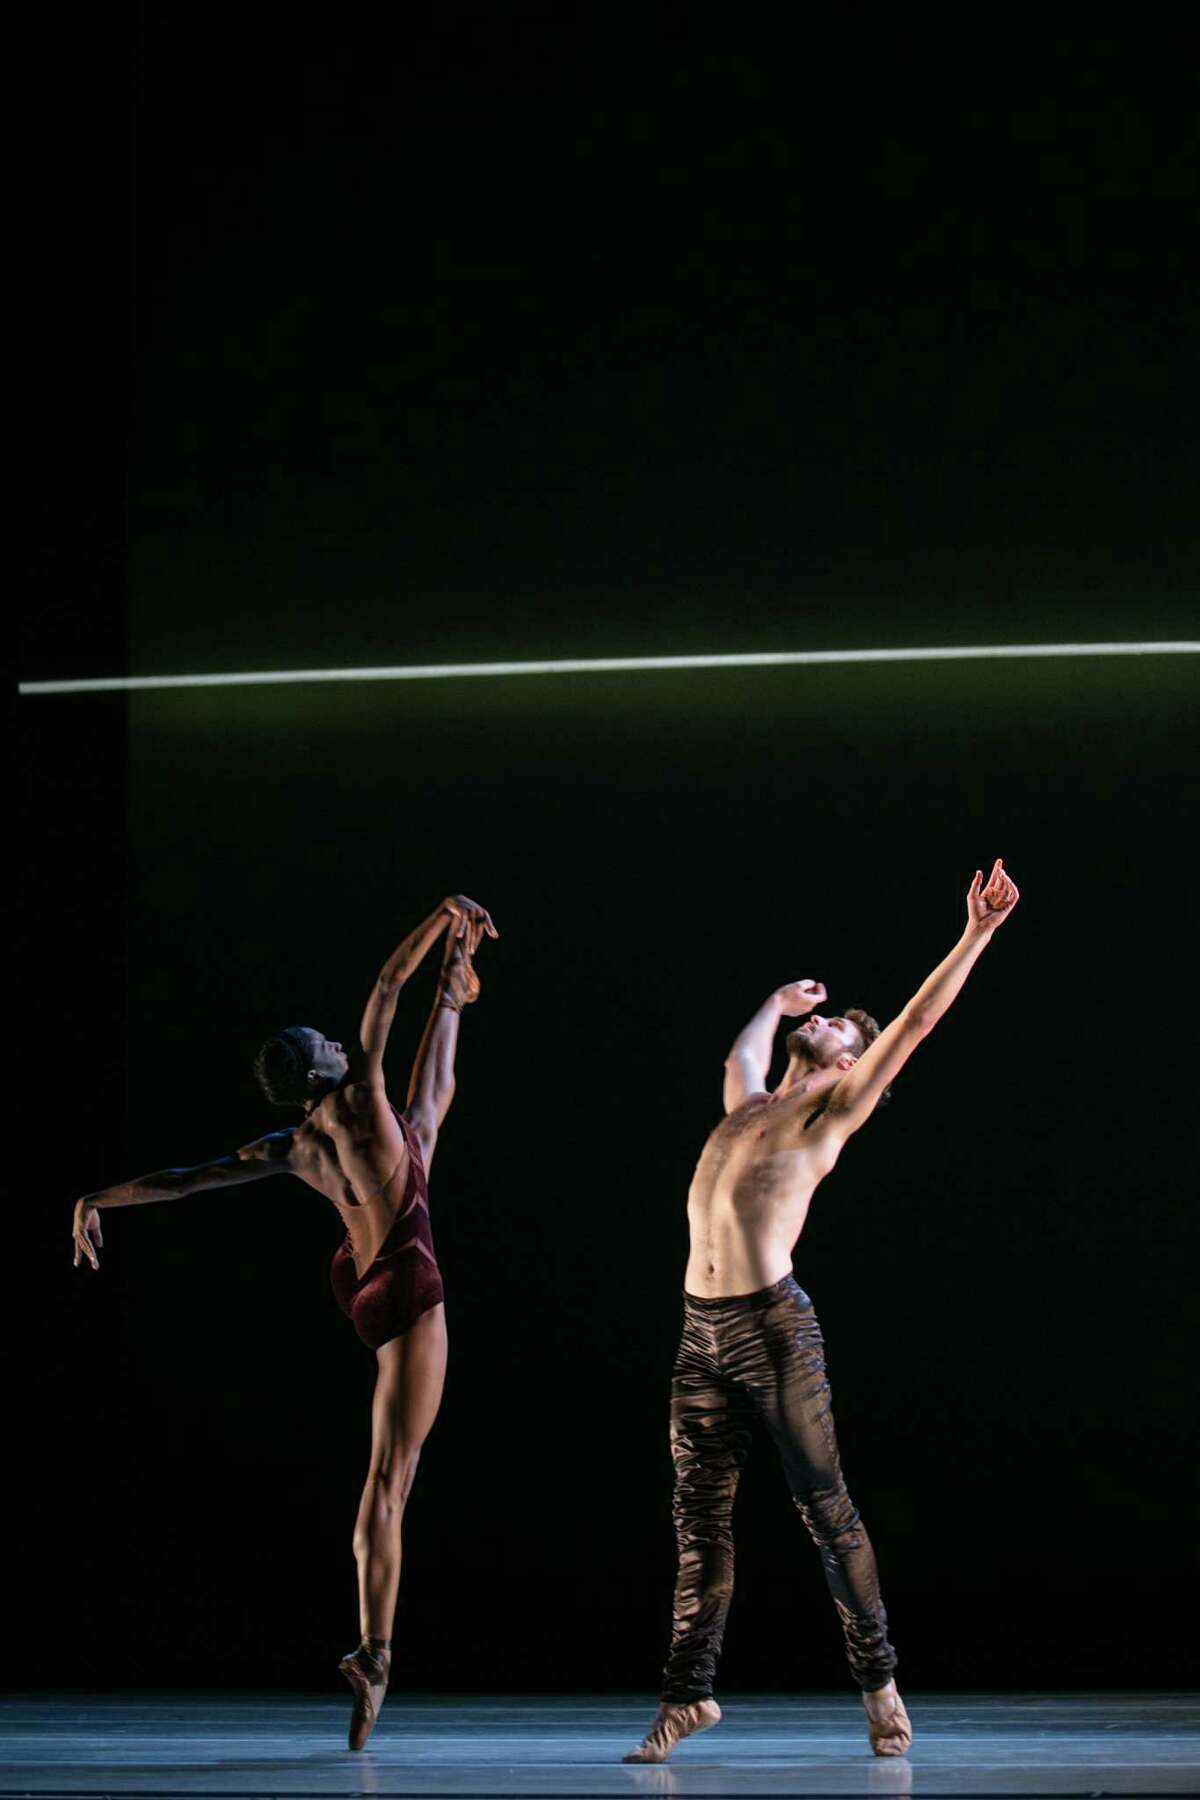 Courtney Henry and Robb Beresford perform in the world premiere of Lines Ballet’s “Shostakovich.”